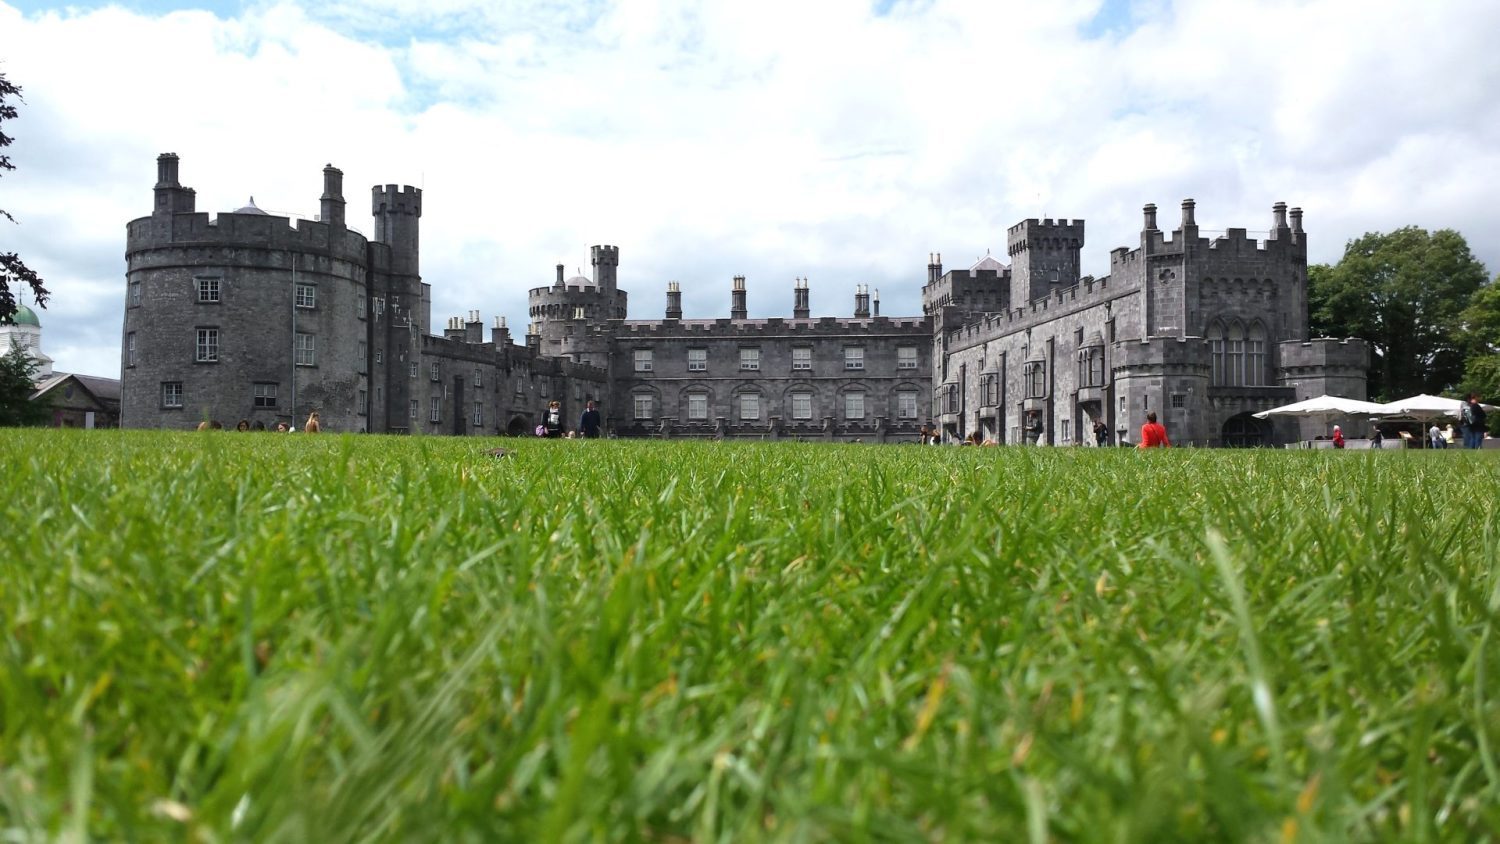 Kilkenny Castle in the heart of the Ancient City of Kilkenny once inhabited by the Vikings